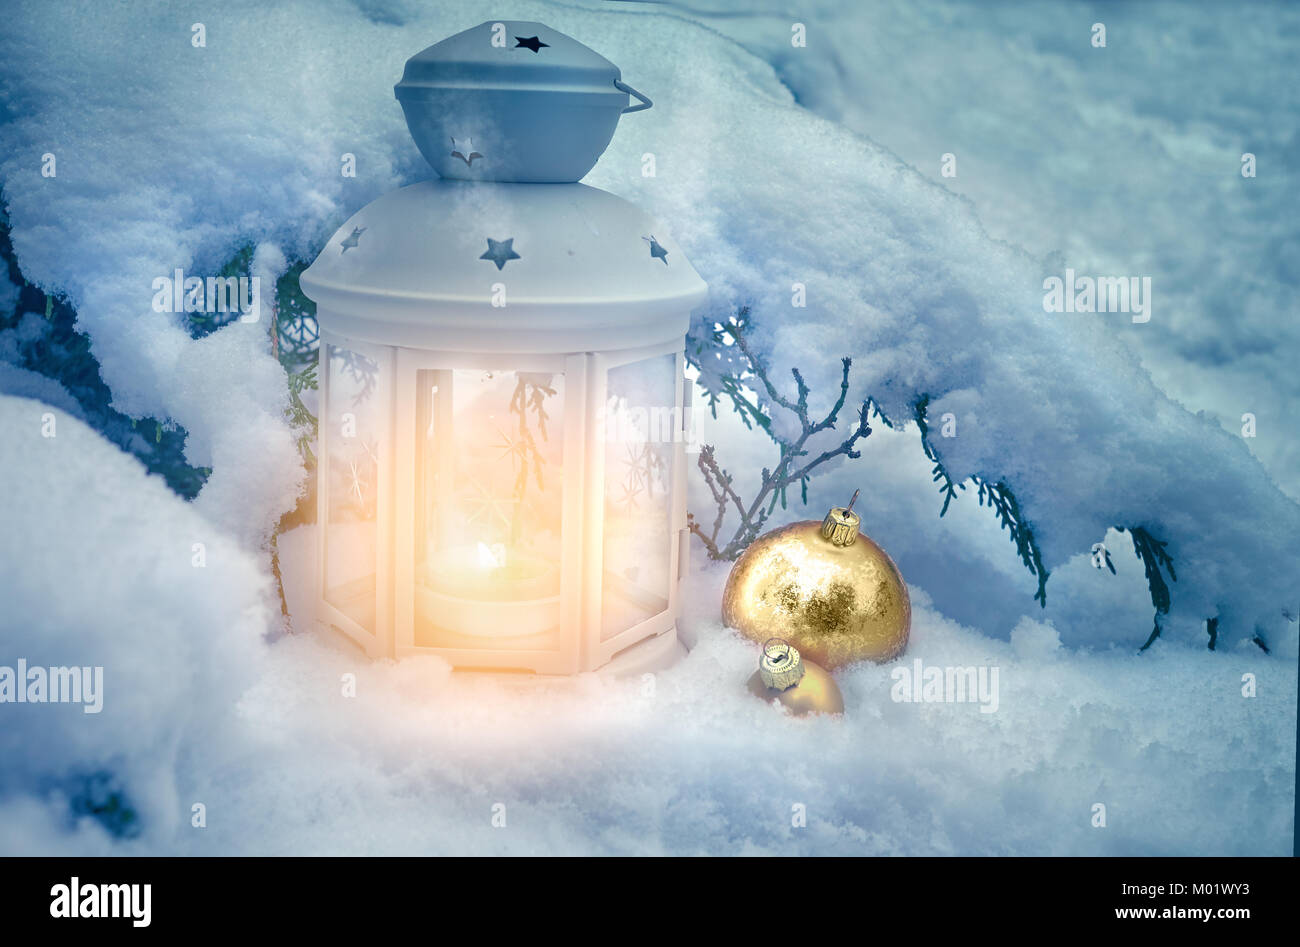 Little winter lanterns outdoors on a Christmas tree under snow. Merry  Christmas! This image is toned Stock Photo - Alamy